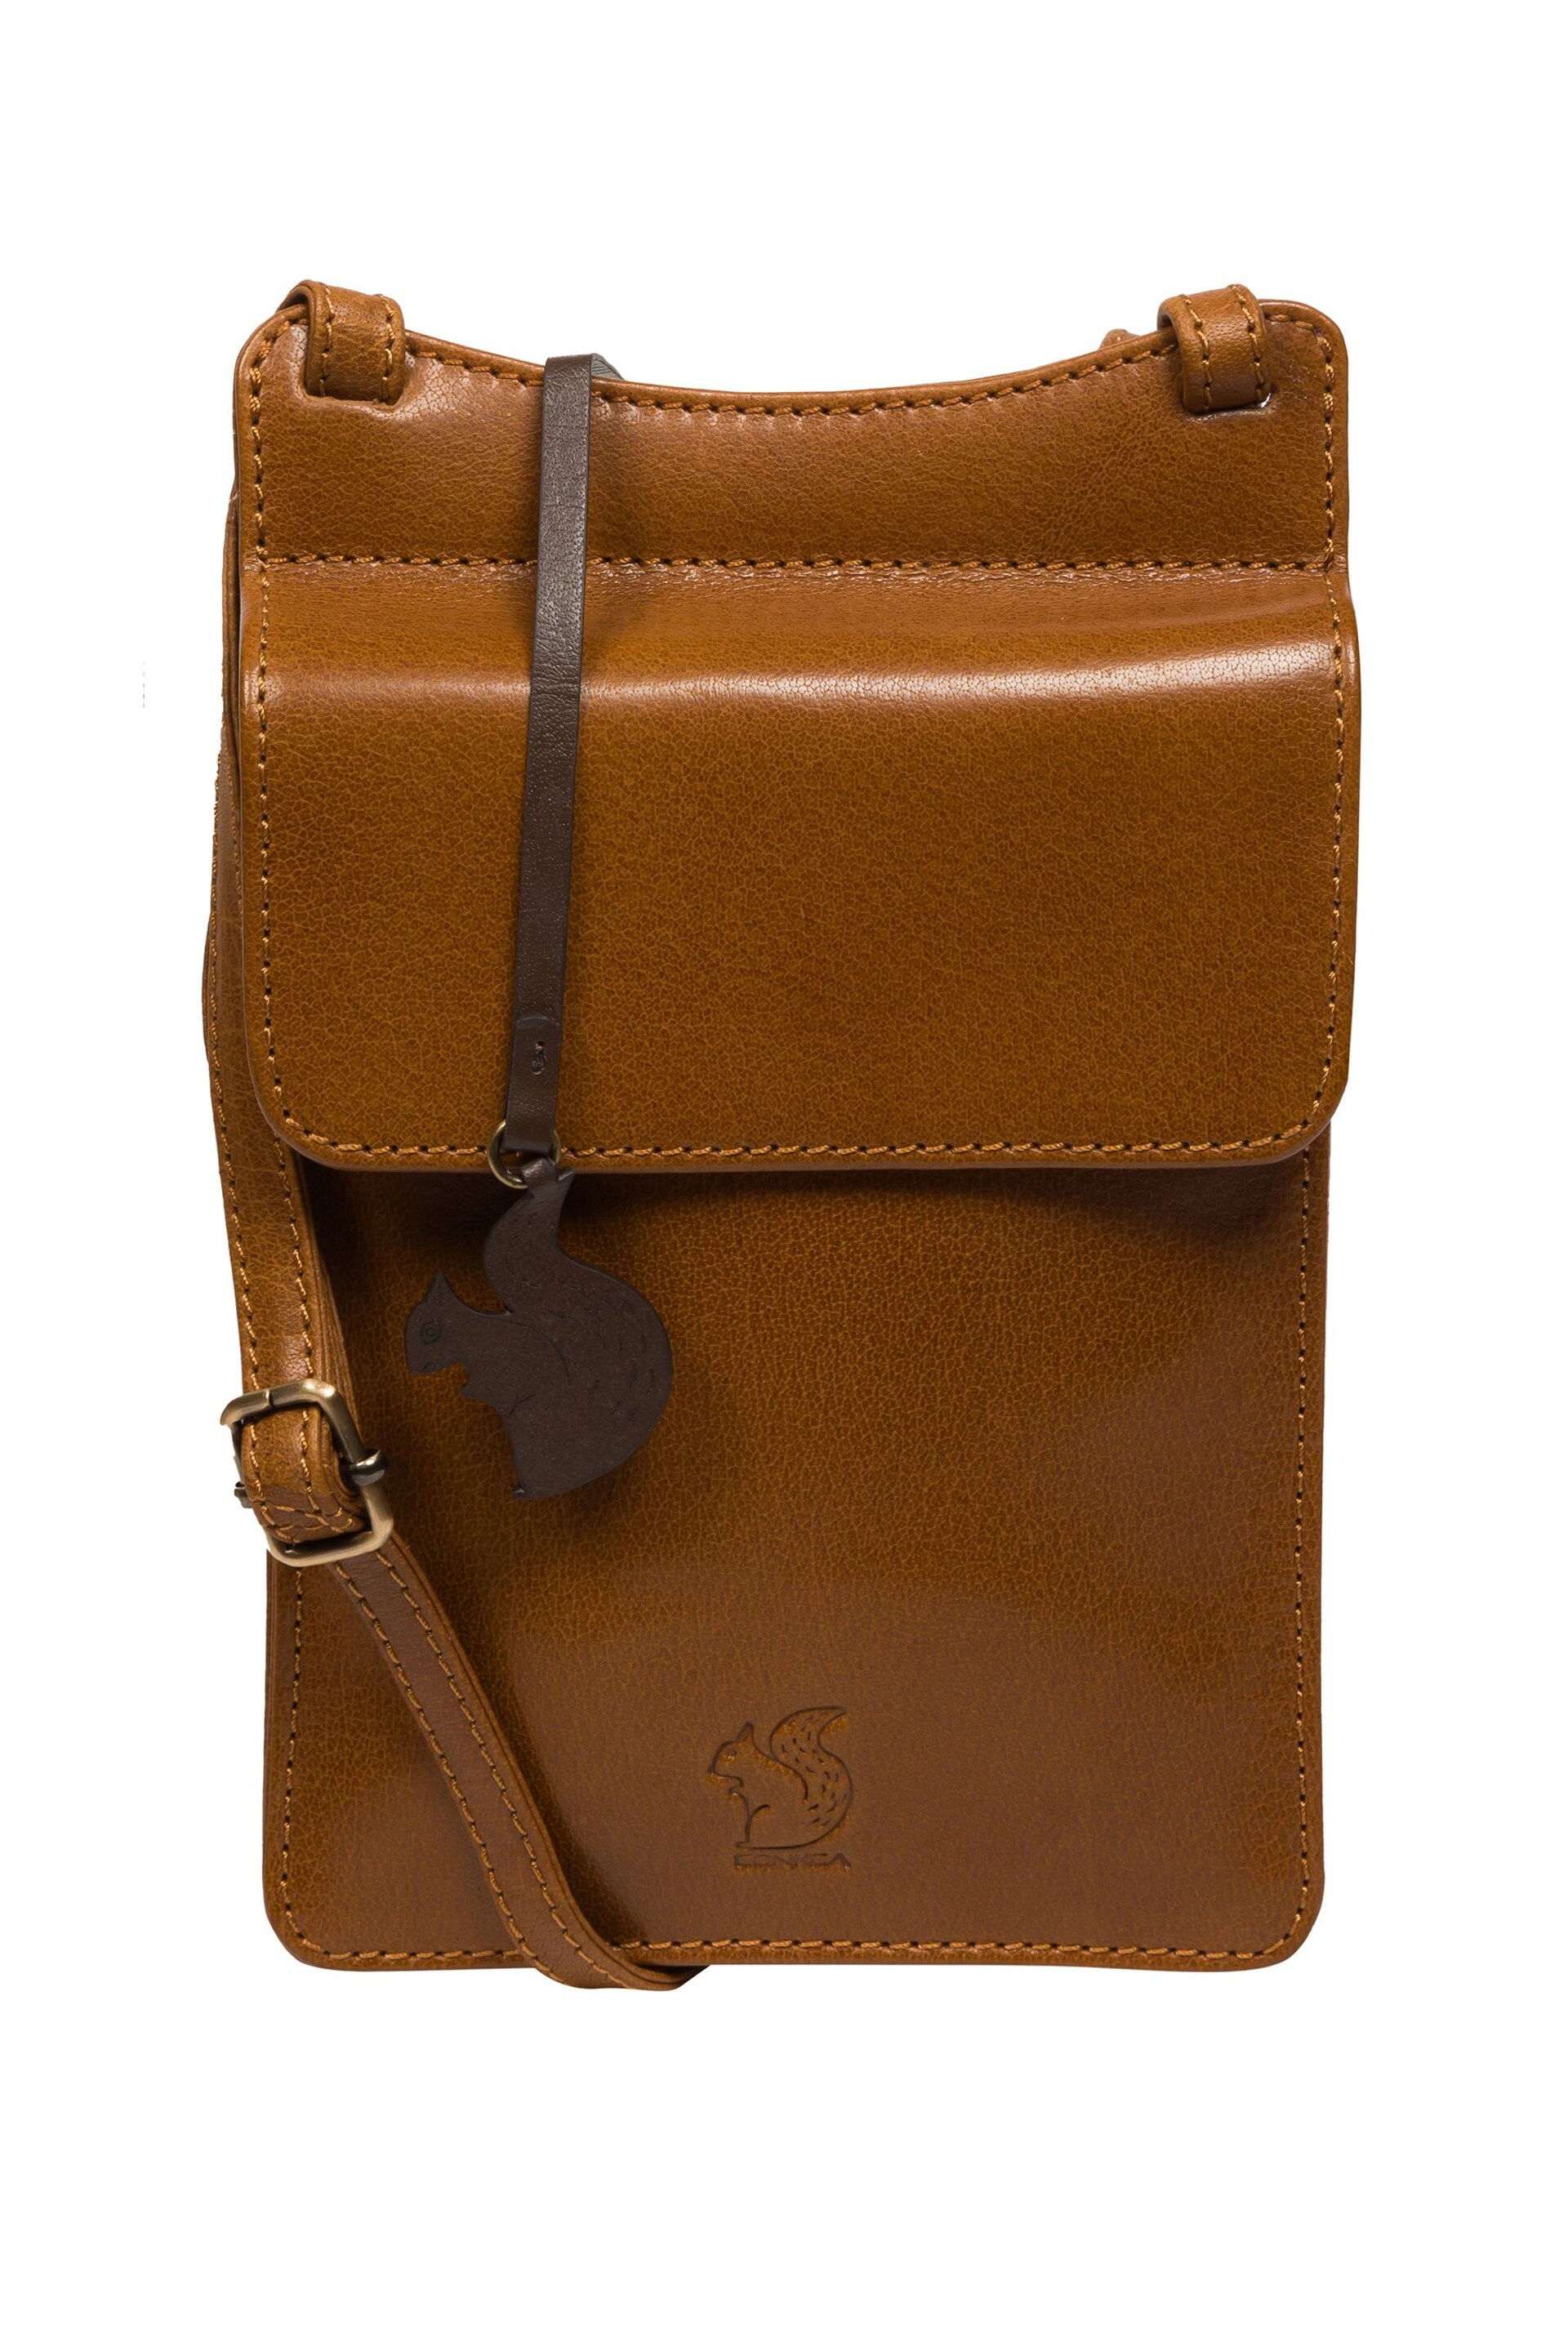 Conkca 'Milly' Leather Cross-Body Phone Black Bag - Image 1 of 6